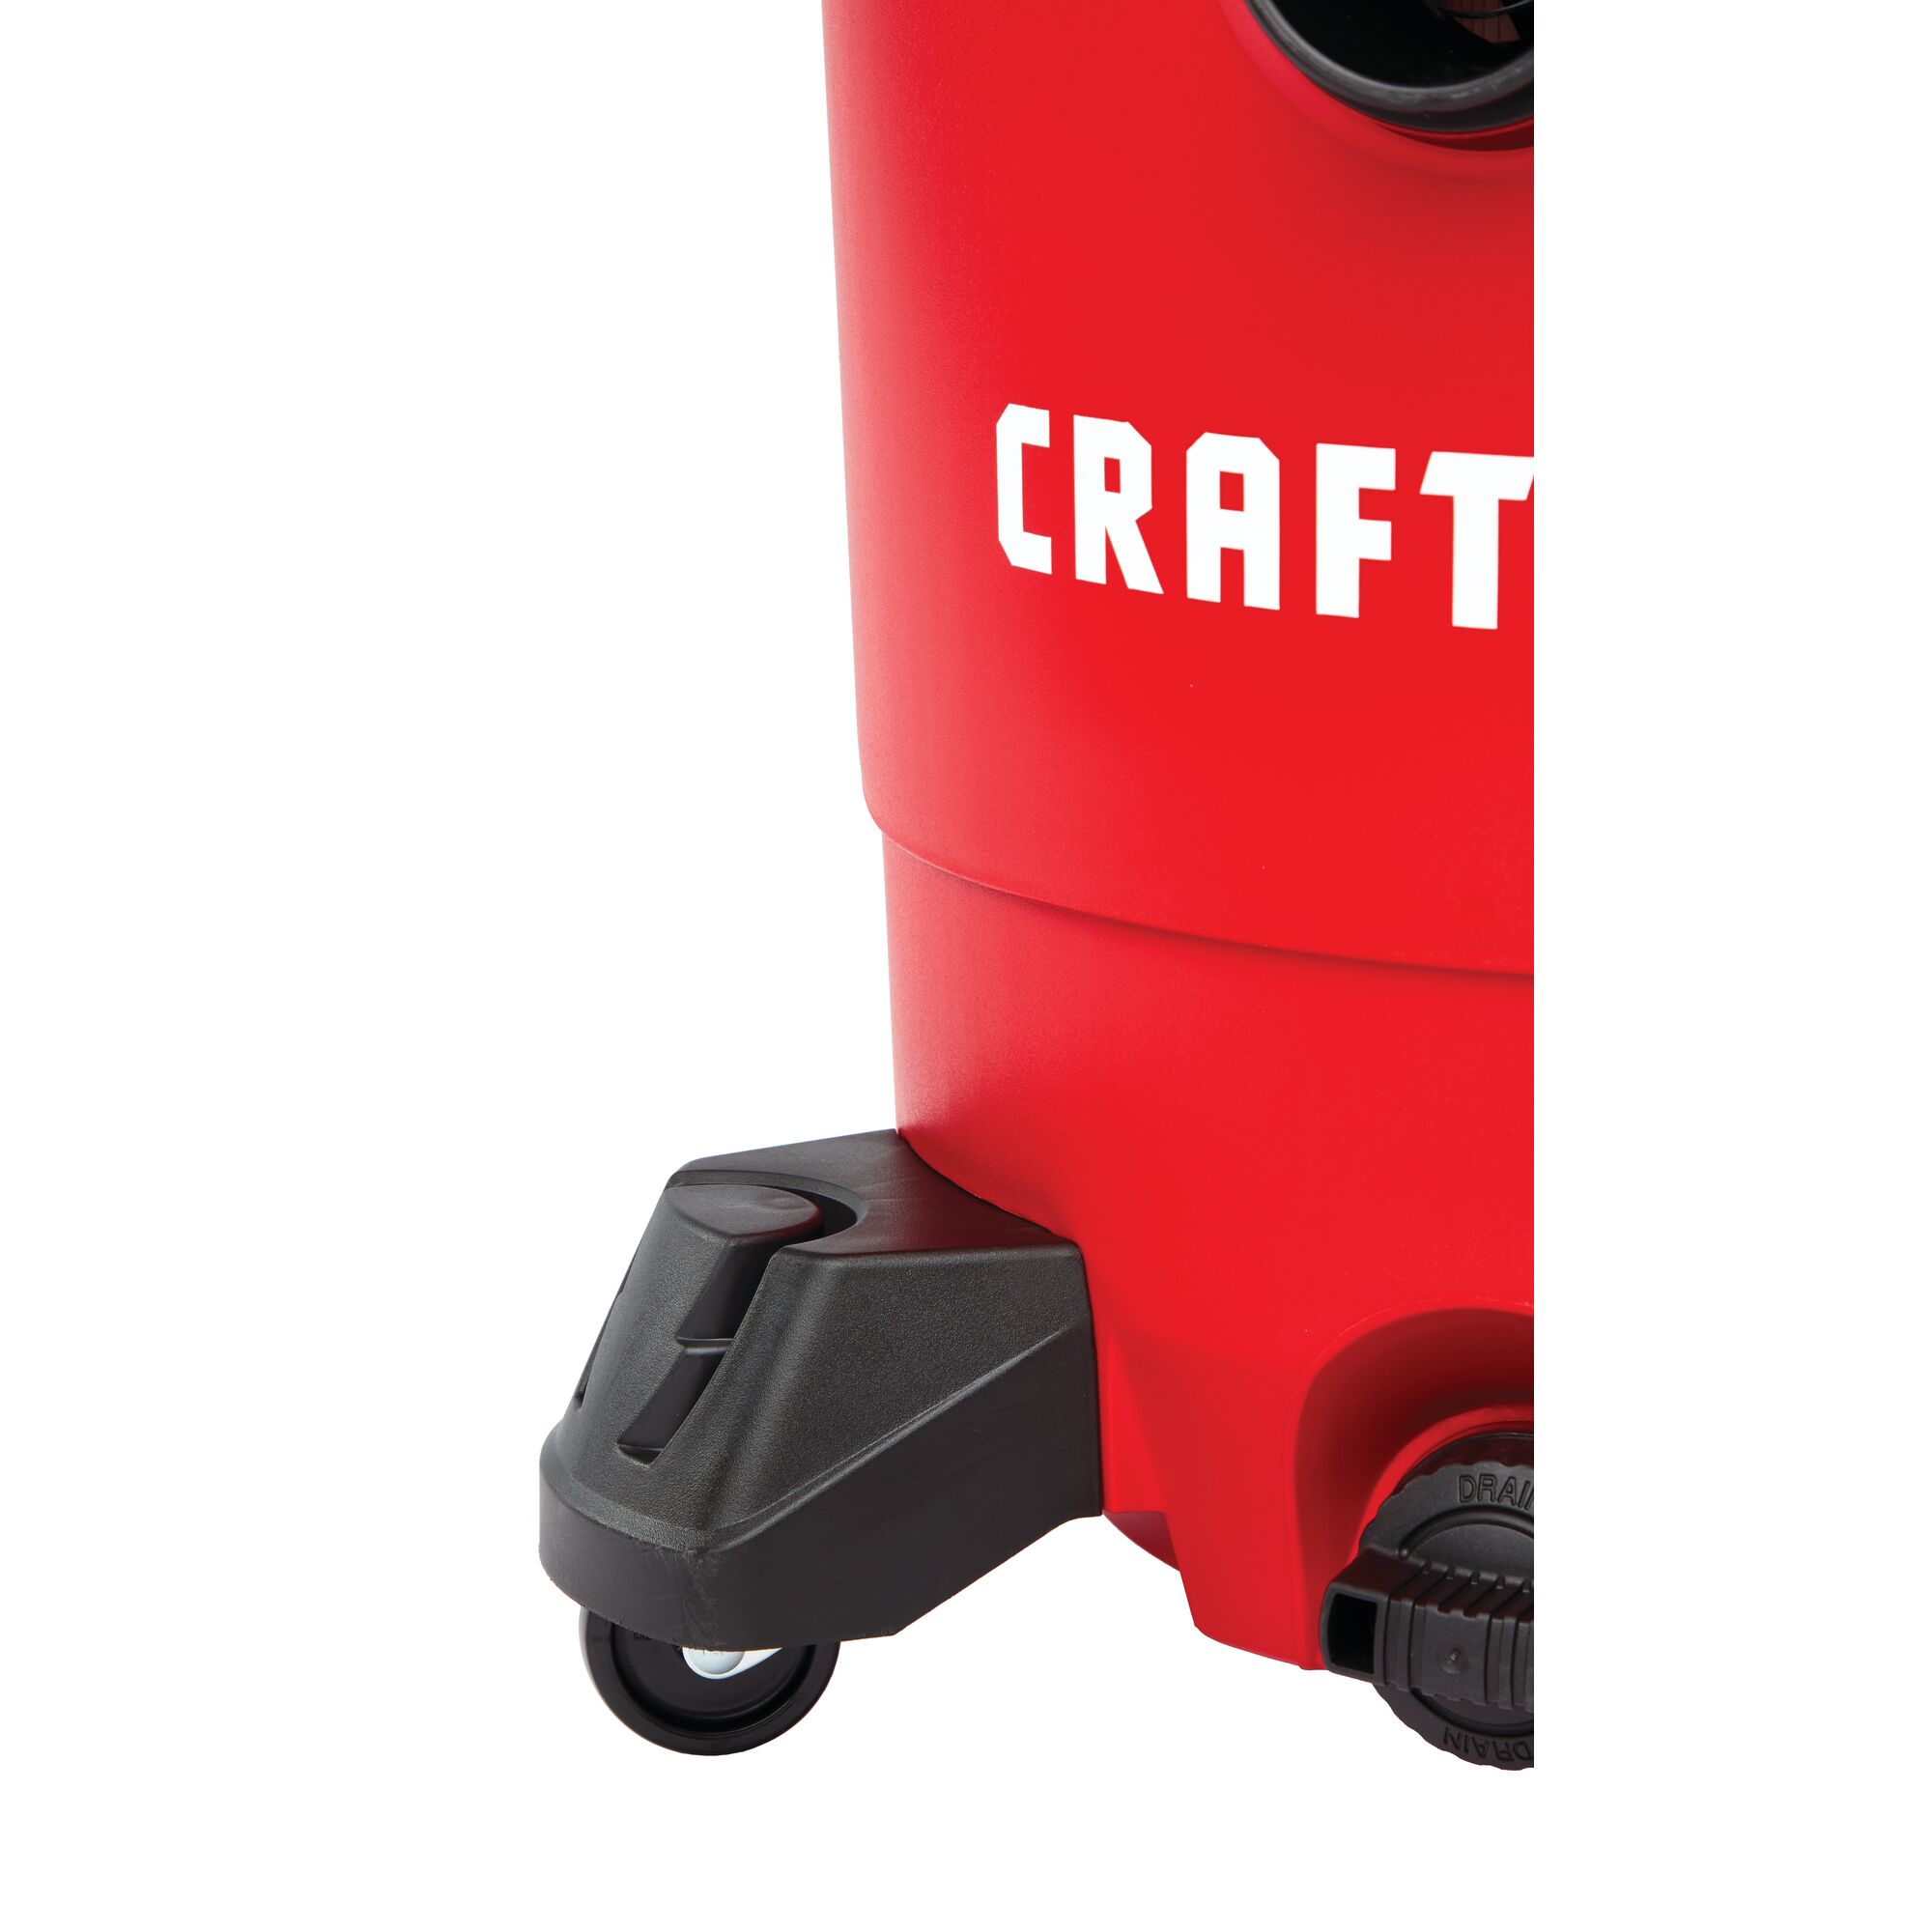 View of CRAFTSMAN Accessories: Vacuums highlighting product features